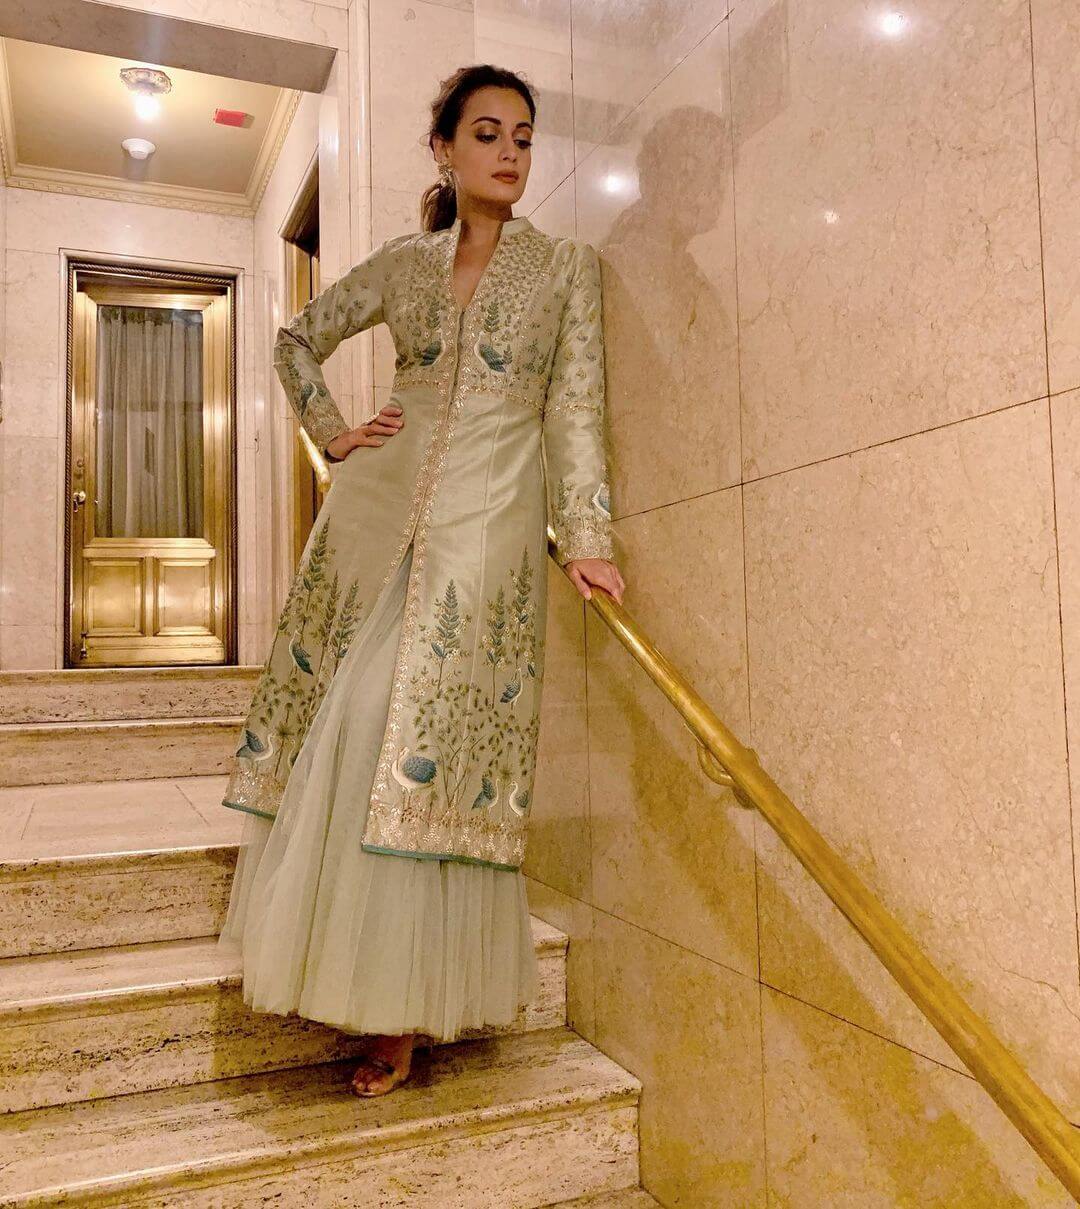 Dia Mirza wore a pistachio green, handpainted kurta set with 3D embroidery and sequins and a buoyant kurta skirt set by Anita Dongre